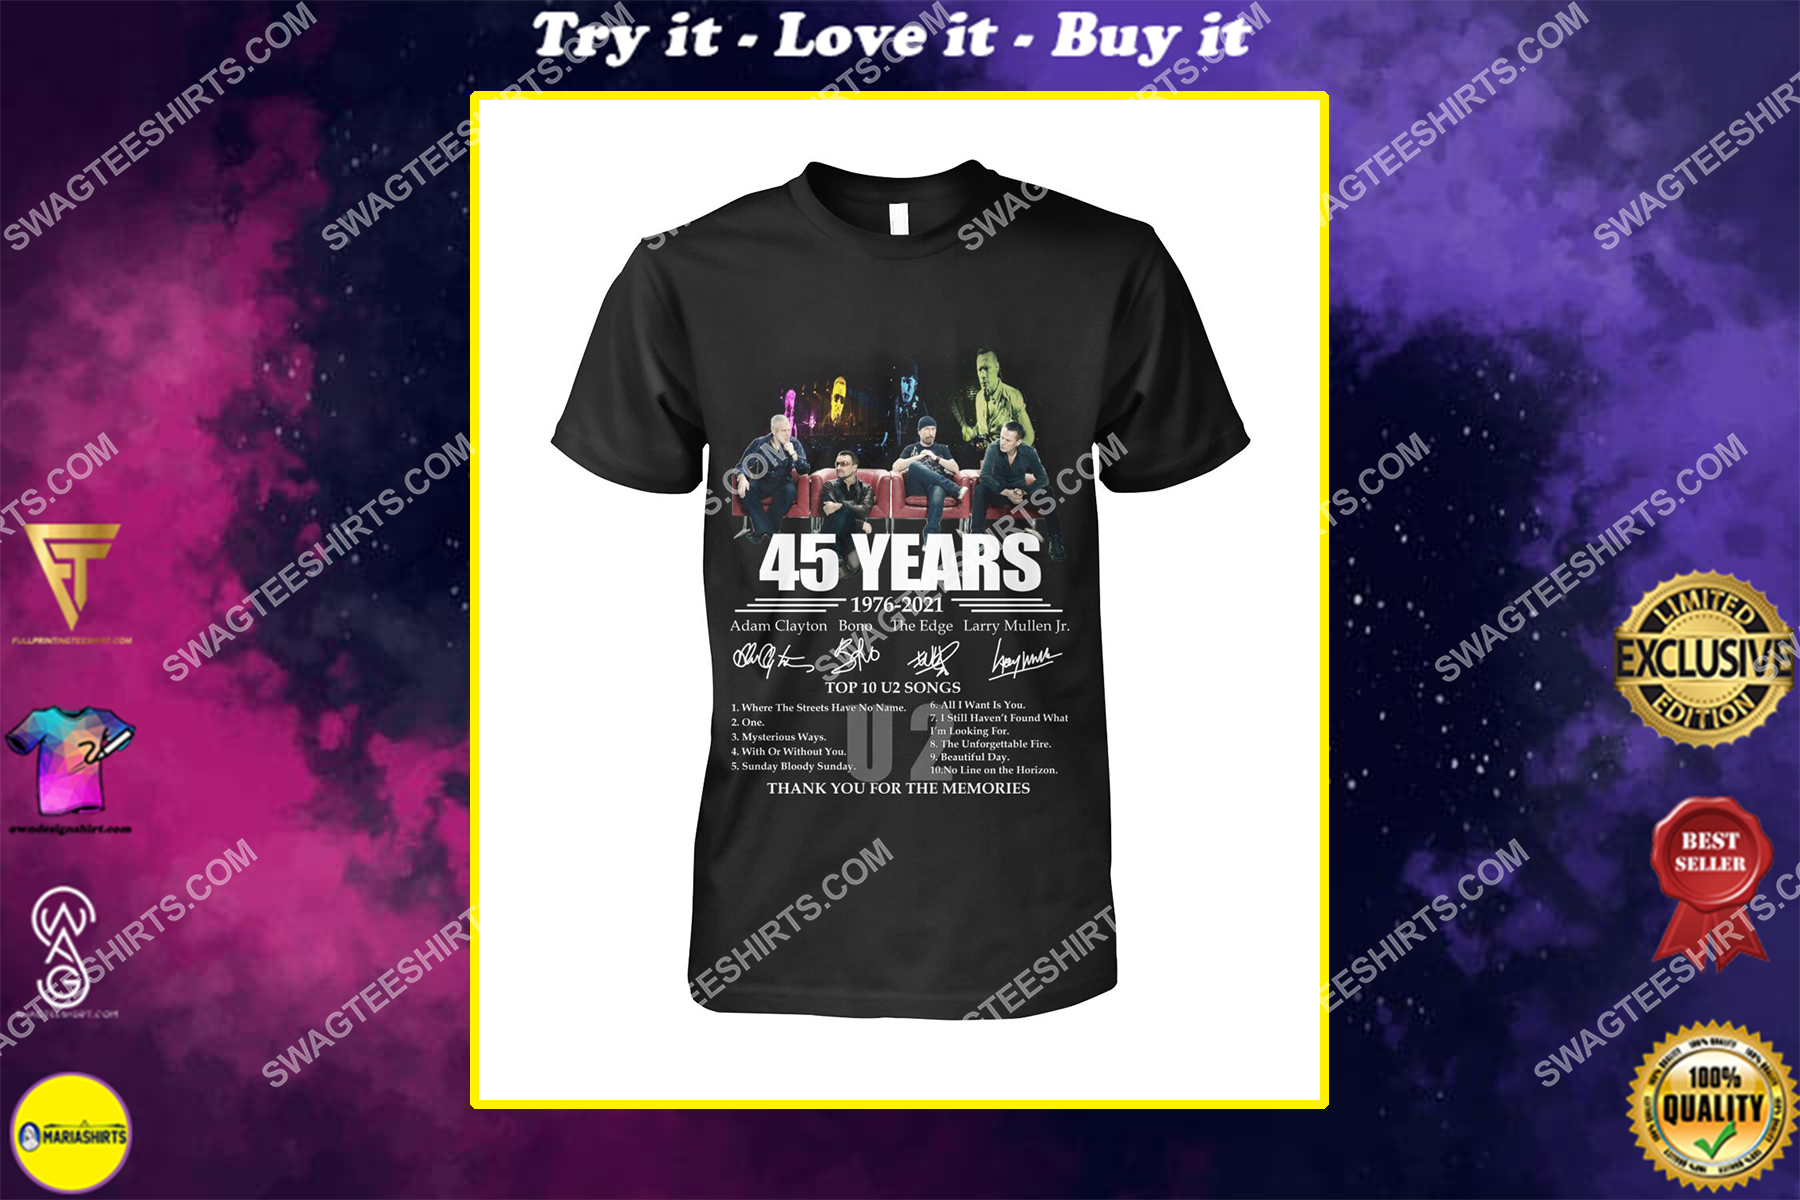 u2 band 45 years thank you for memories signatures shirt